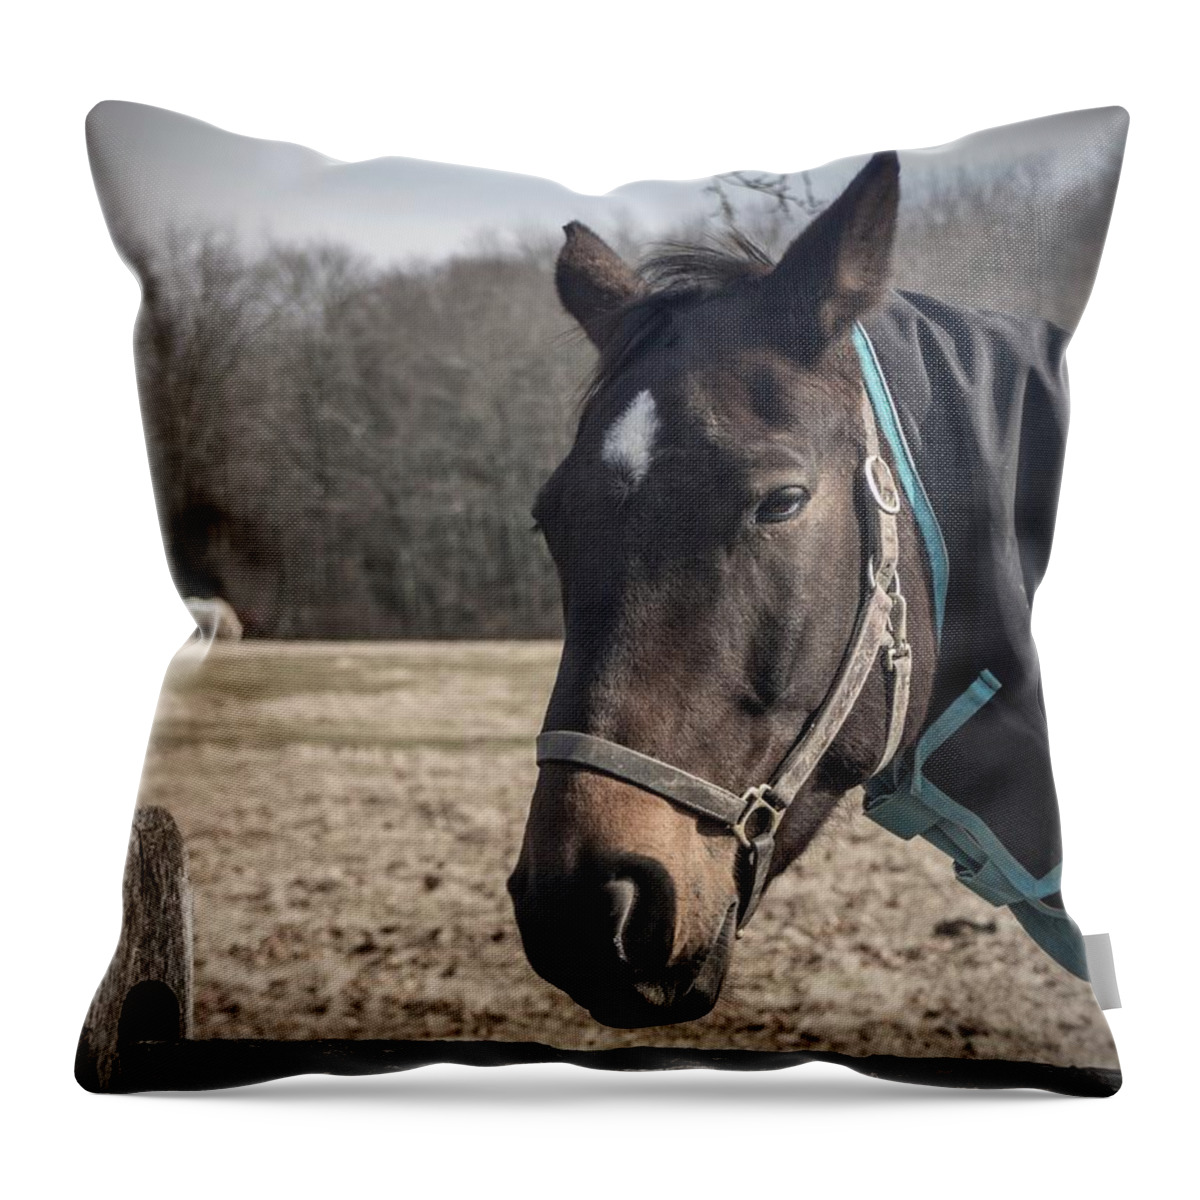 Just Chillin Throw Pillow featuring the photograph Just Chillin by Photographic Arts And Design Studio